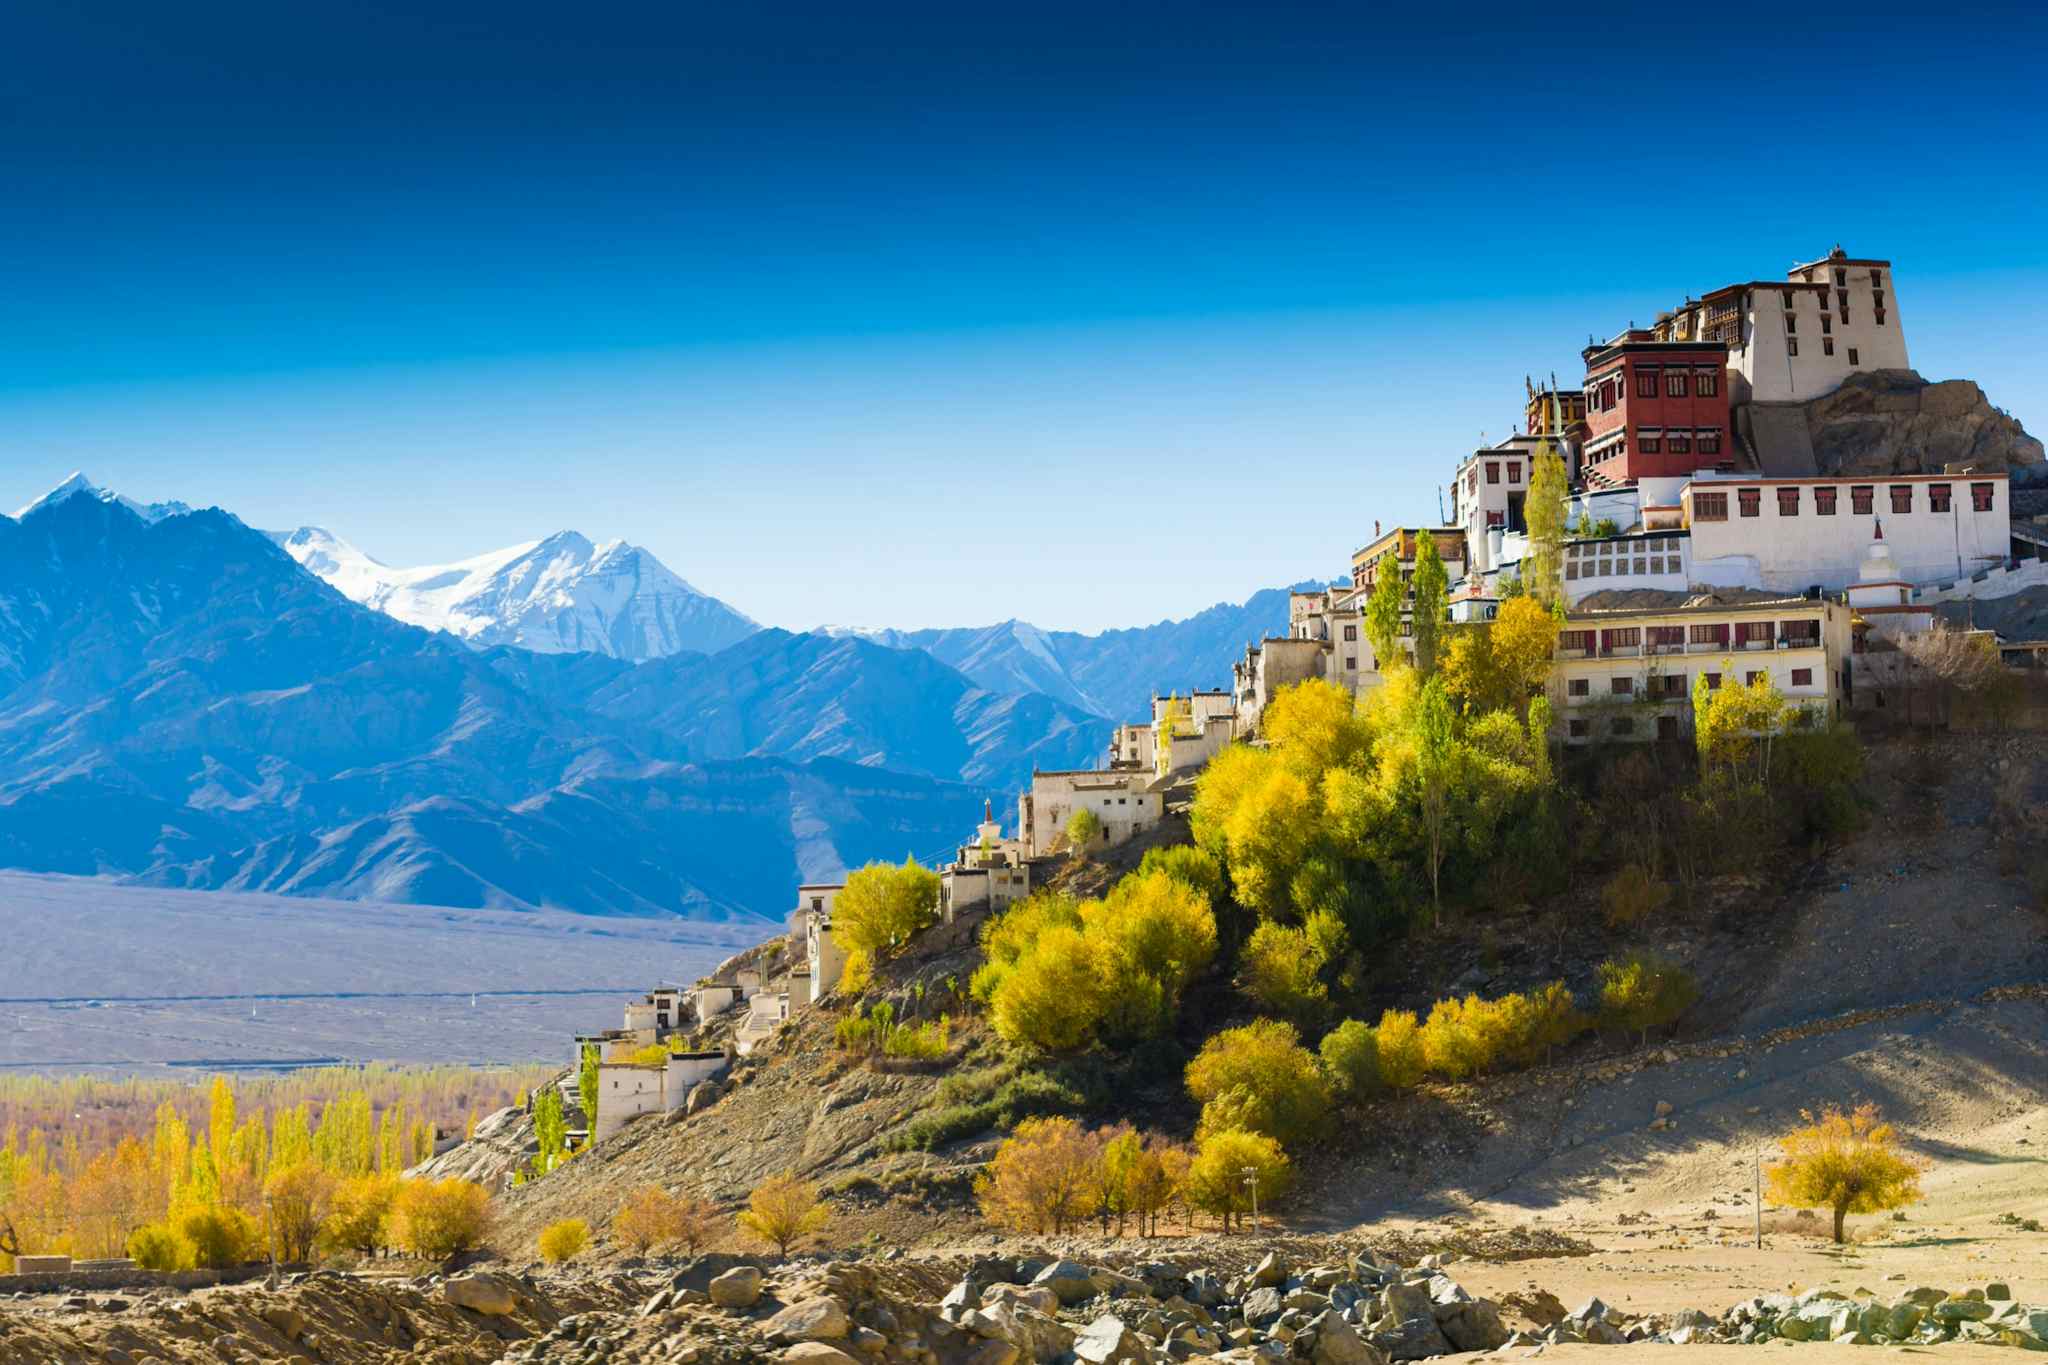 Buildings of Leh with high mountain backdrop in Ladakh, India